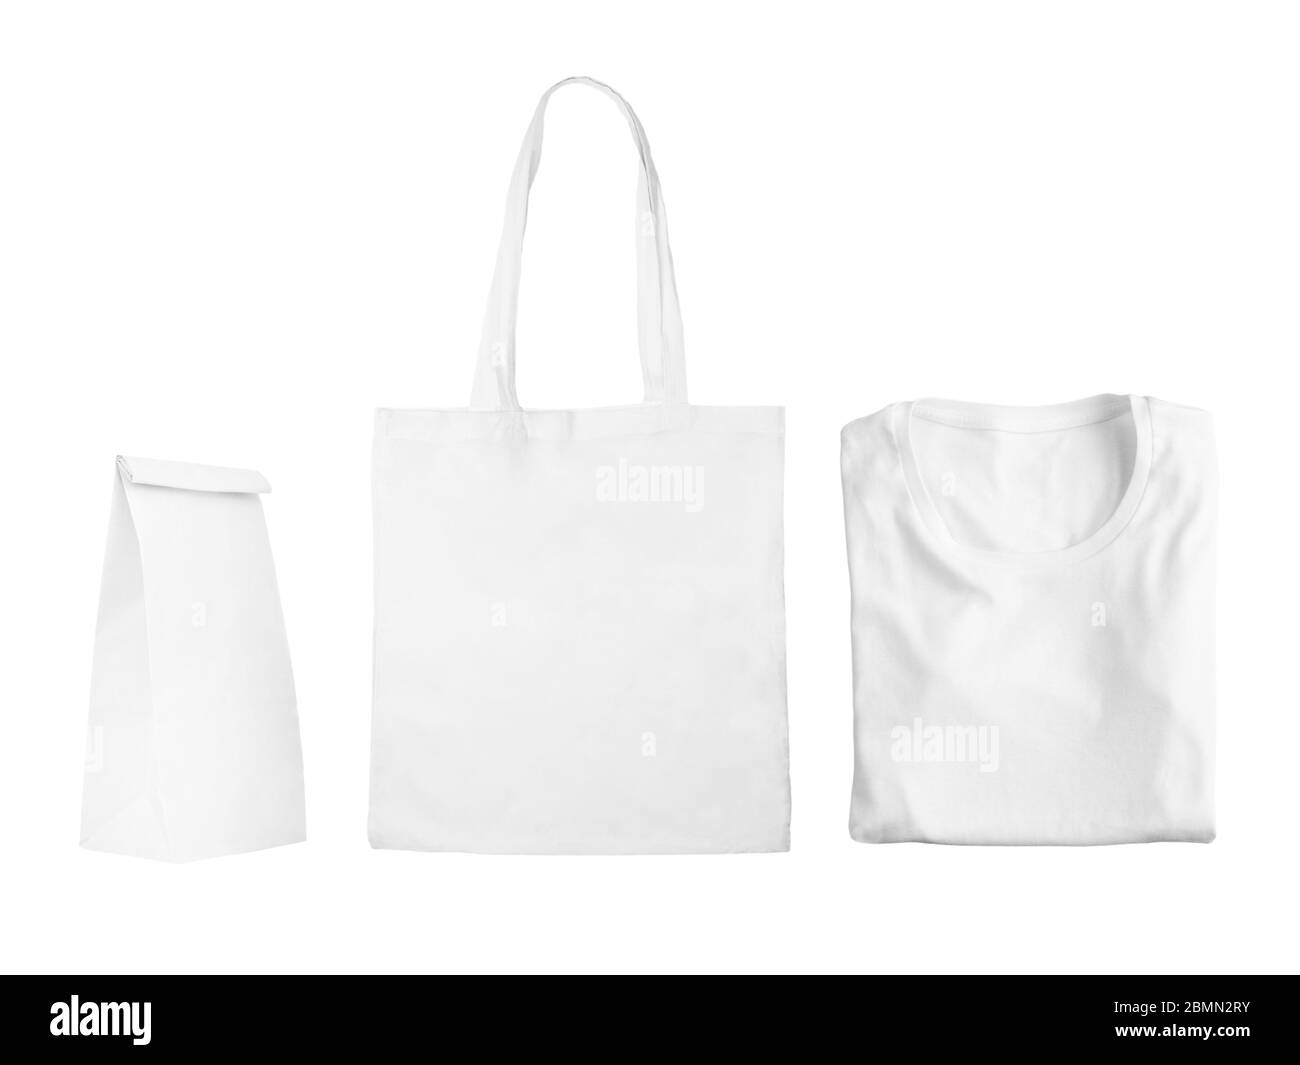 Collection of white objects isolated on white background. White cotton bag, white folded t-shirt, paper bag package. Flat lay Stock Photo